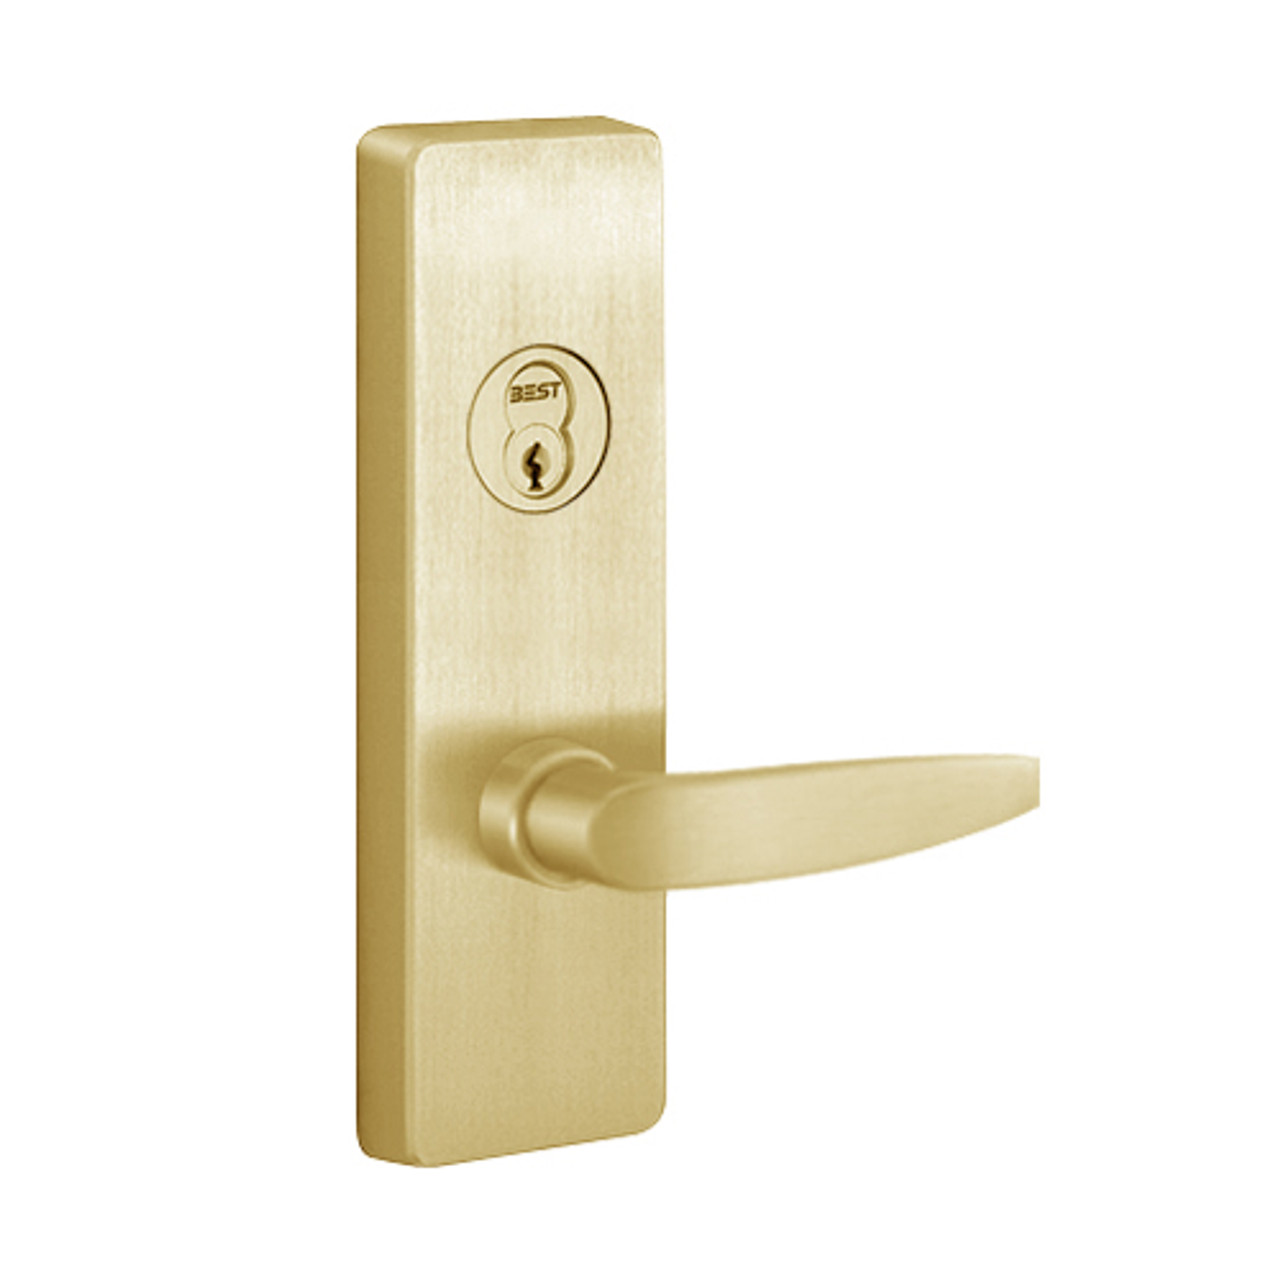 RV4908B-606-RHR PHI Key Controls Lever Vandal Resistant Retrofit Trim with B Lever Design for Apex and Olympian Series Exit Device in Satin Brass Finish